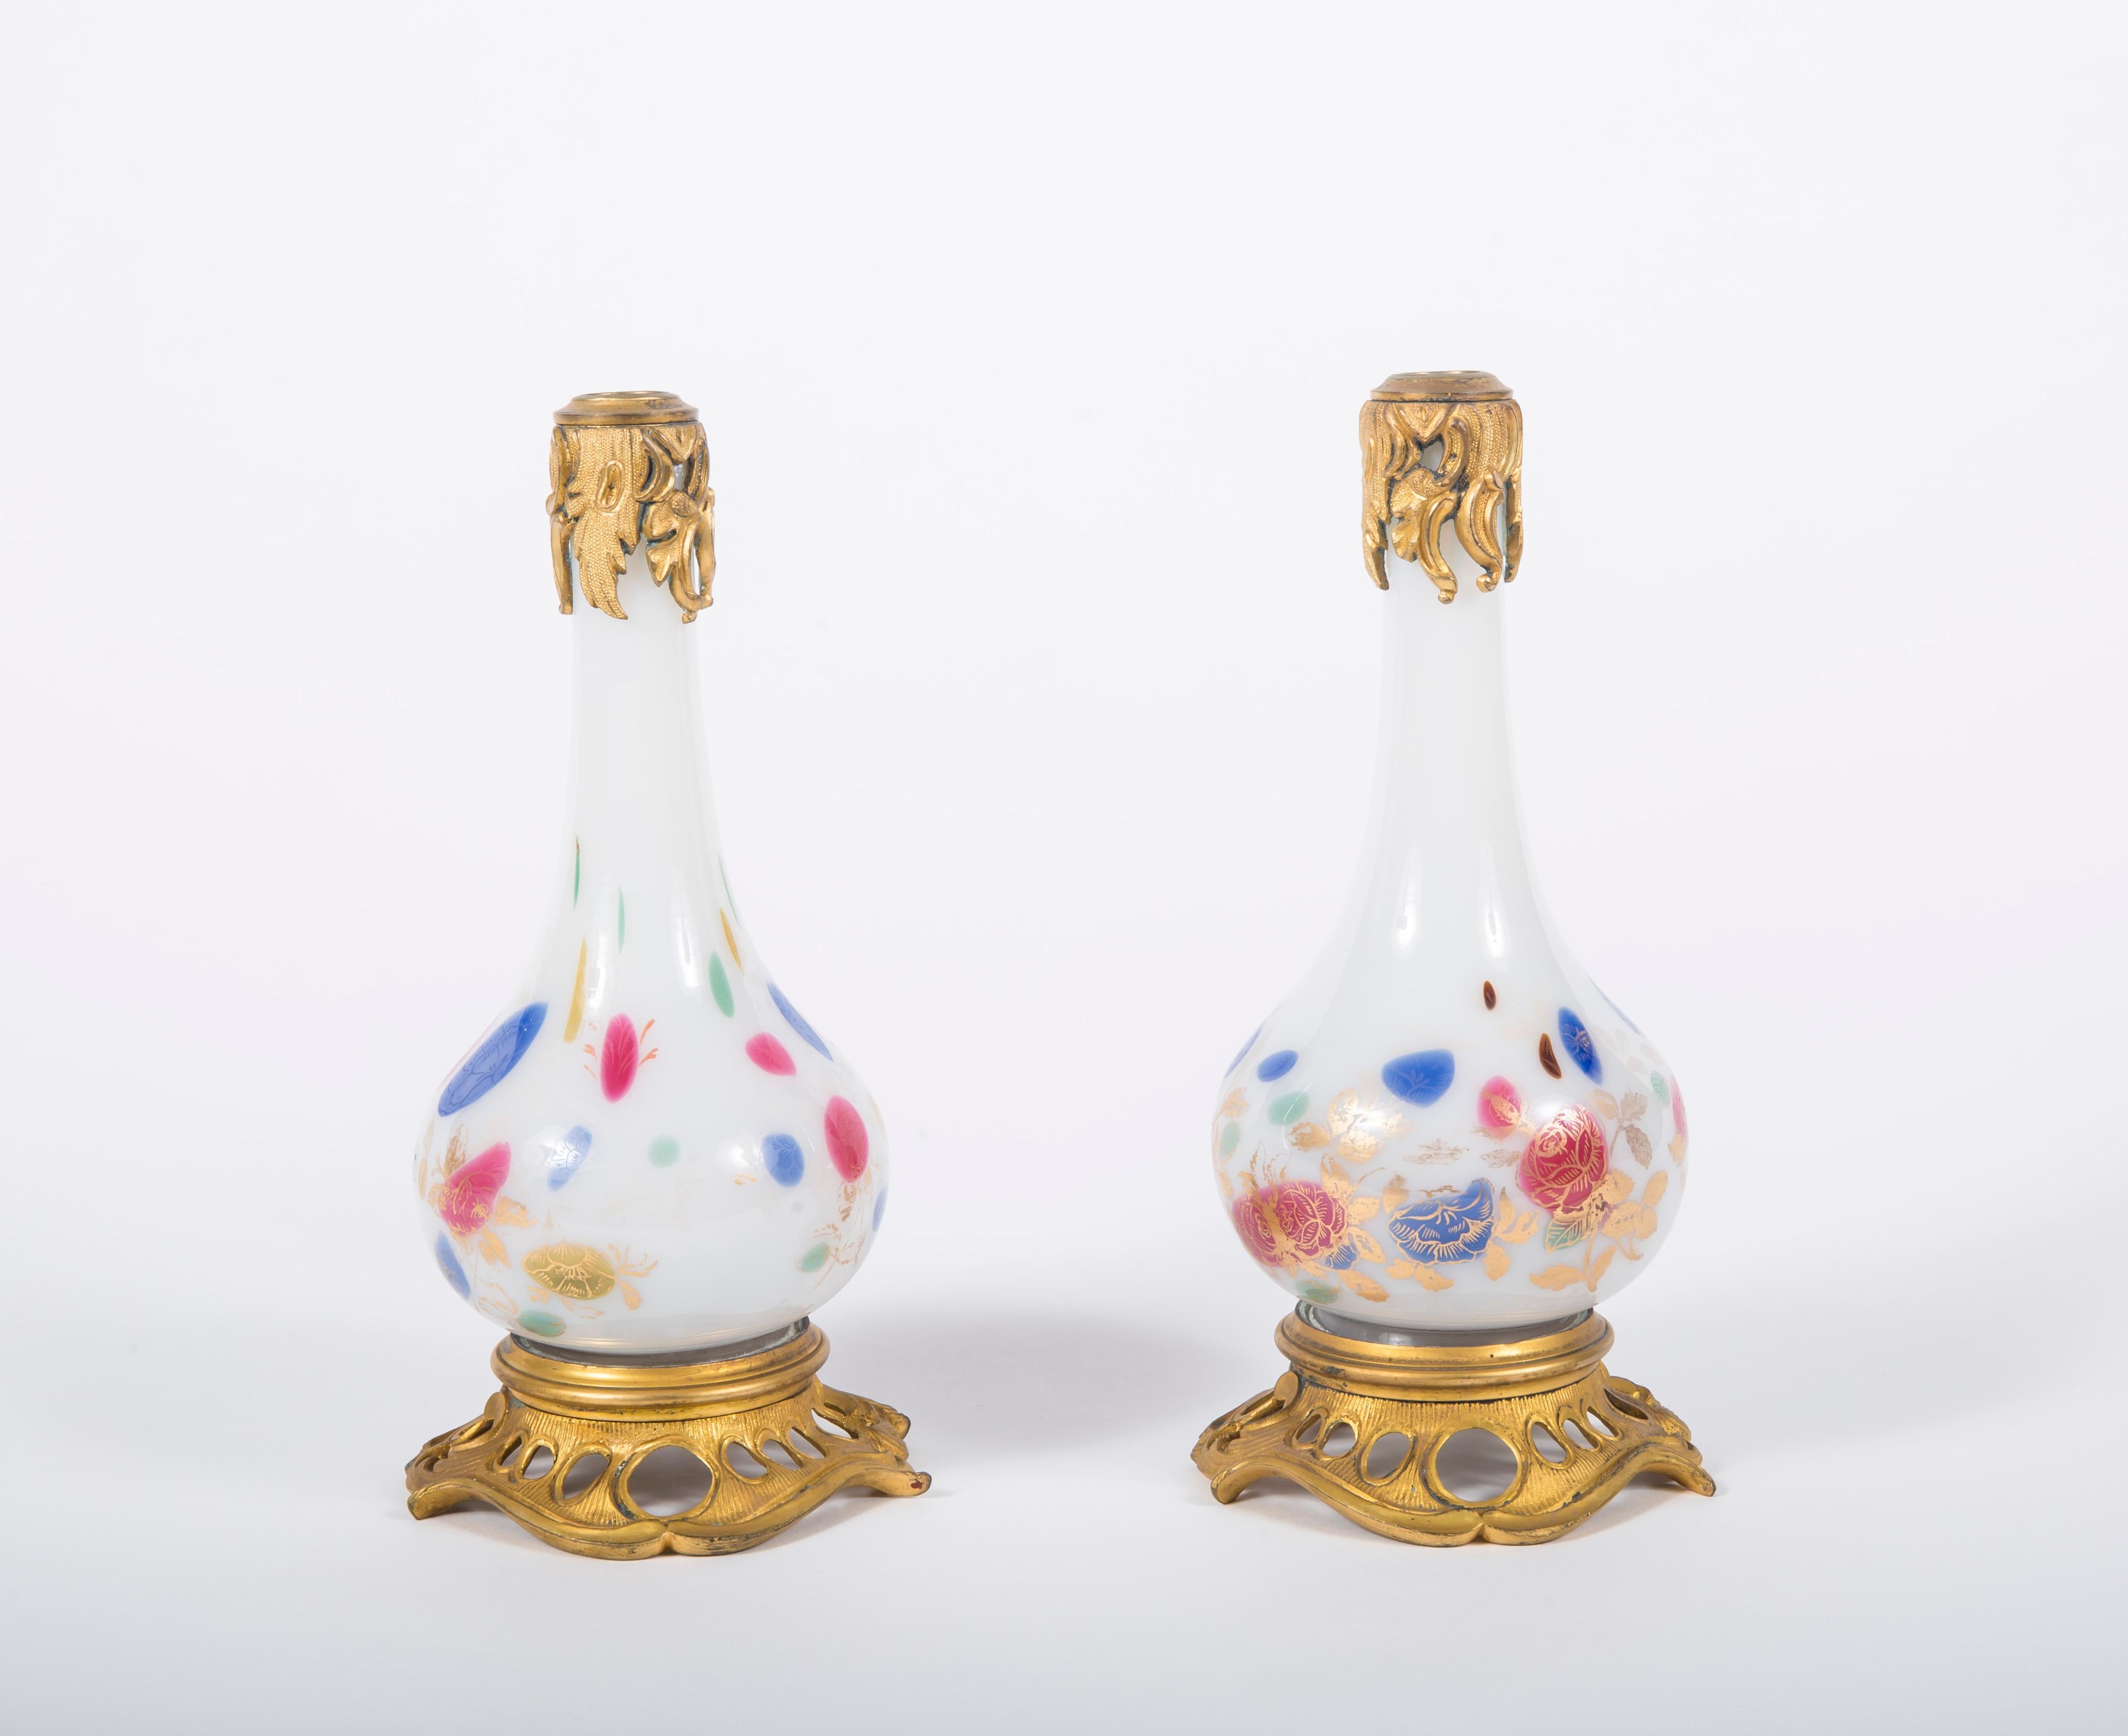 A pair of white opaline bottles, painted with gilt bronze mounts. Flame tip mounted caps, 19th century.
Measures: H 9 in (22.8 cm)

Inv No. NMA 3454.